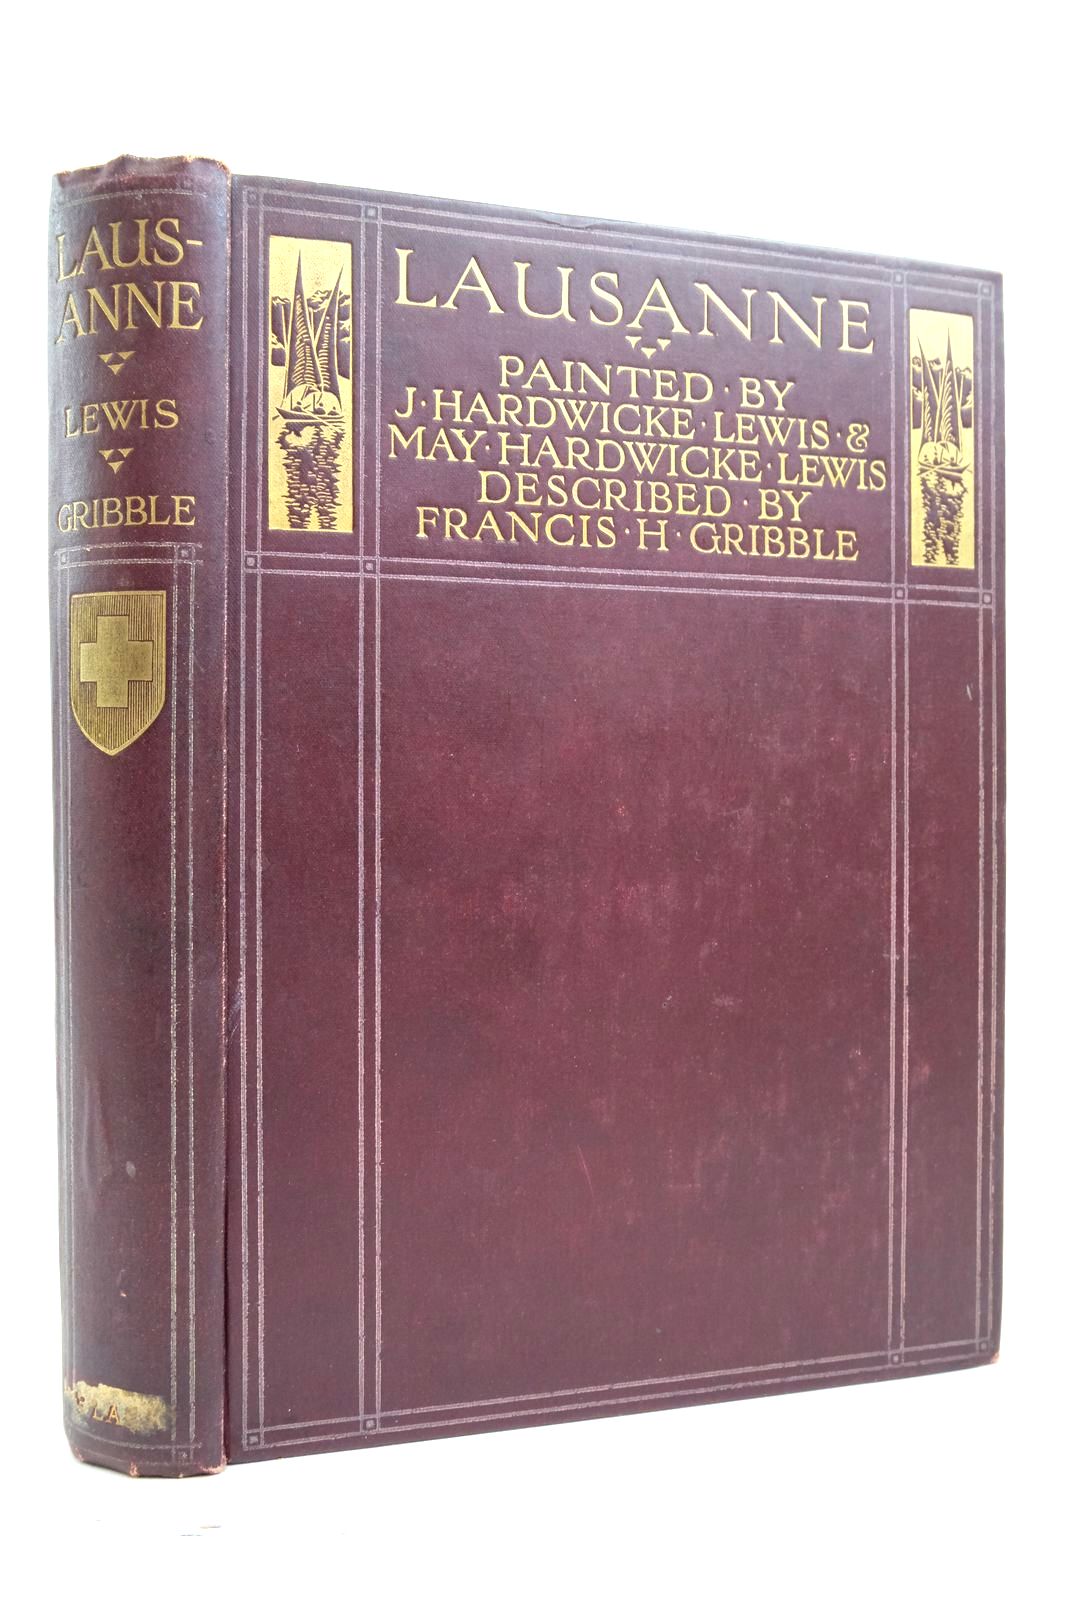 Photo of LAUSANNE written by Gribble, Francis illustrated by Lewis, J. Hardwicke Lewis, May Hardwicke published by Adam &amp; Charles Black (STOCK CODE: 2137080)  for sale by Stella & Rose's Books